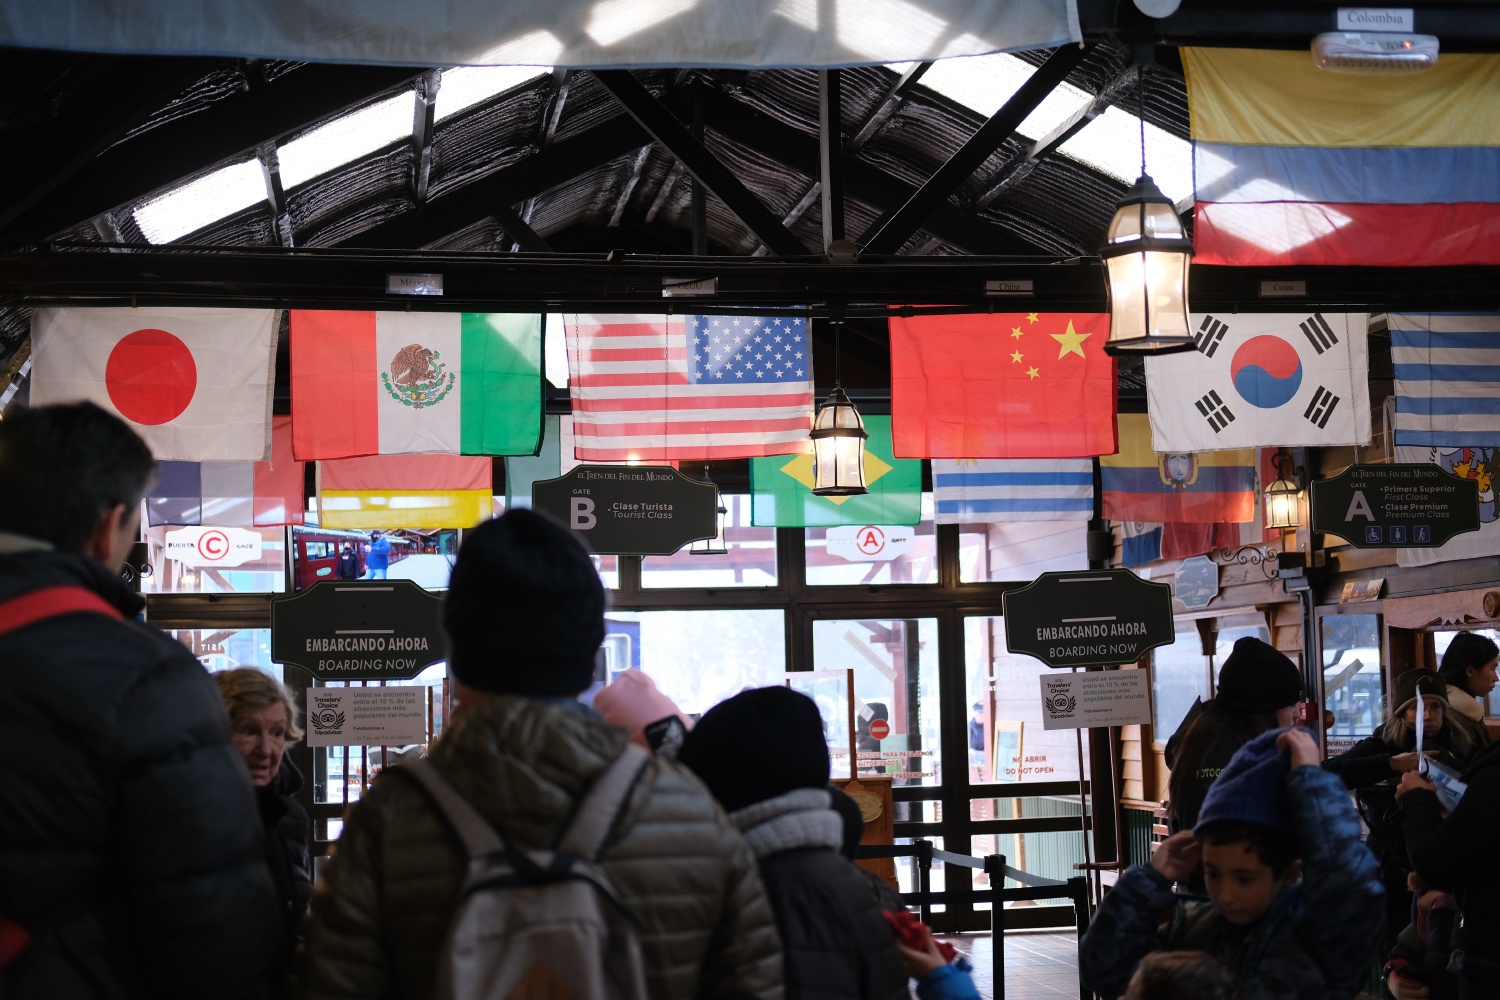 Flags decorate the train station *at the end of the world*